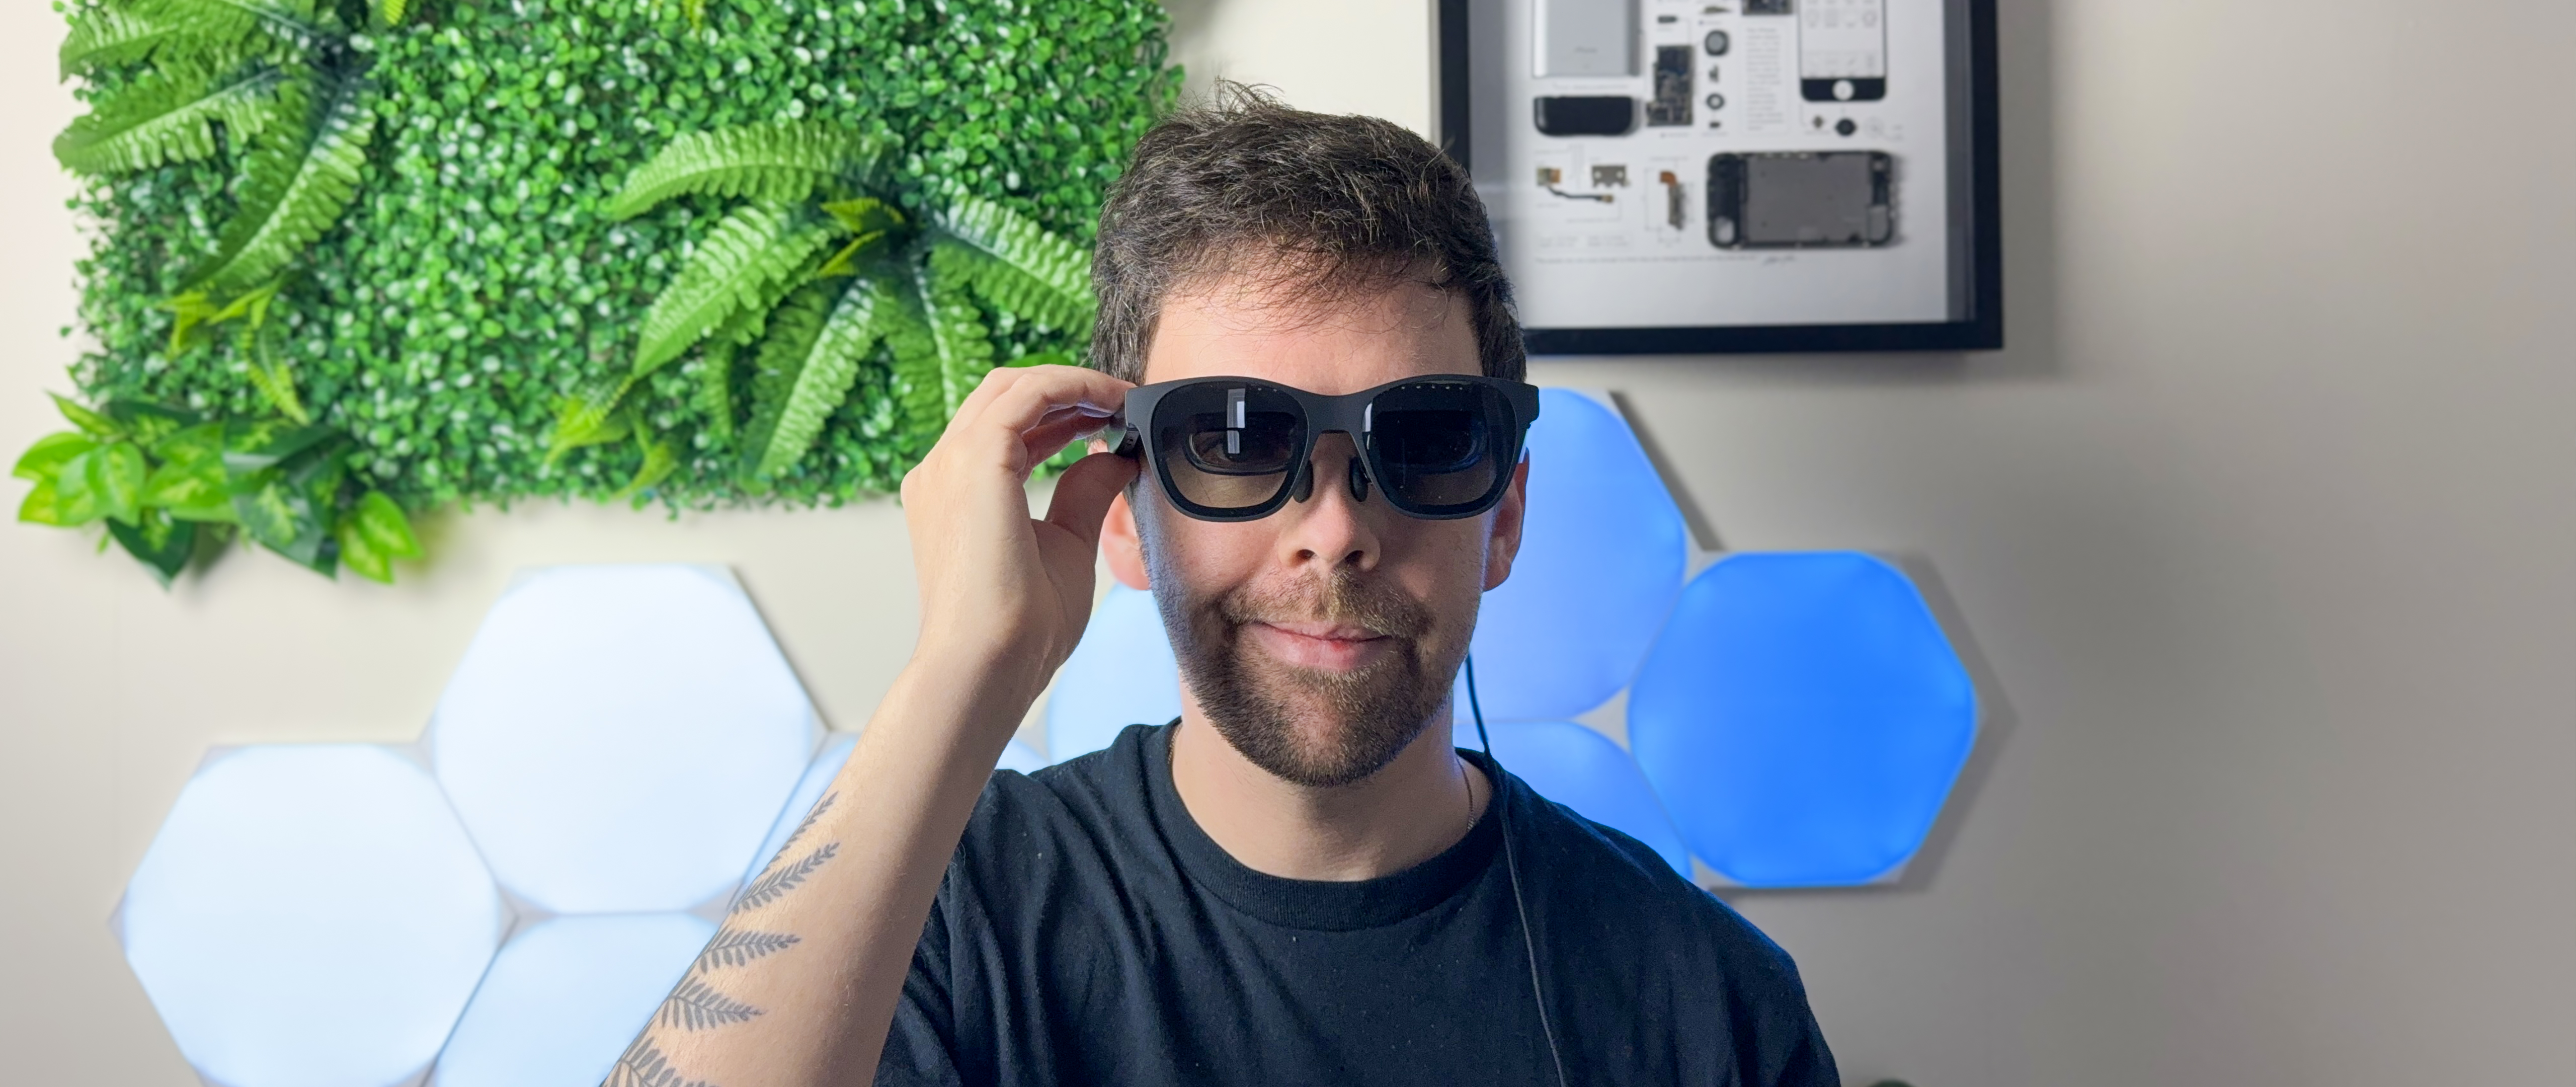 I Tried Smart Glasses for 7 Days (XREAL Air AR Glasses) 